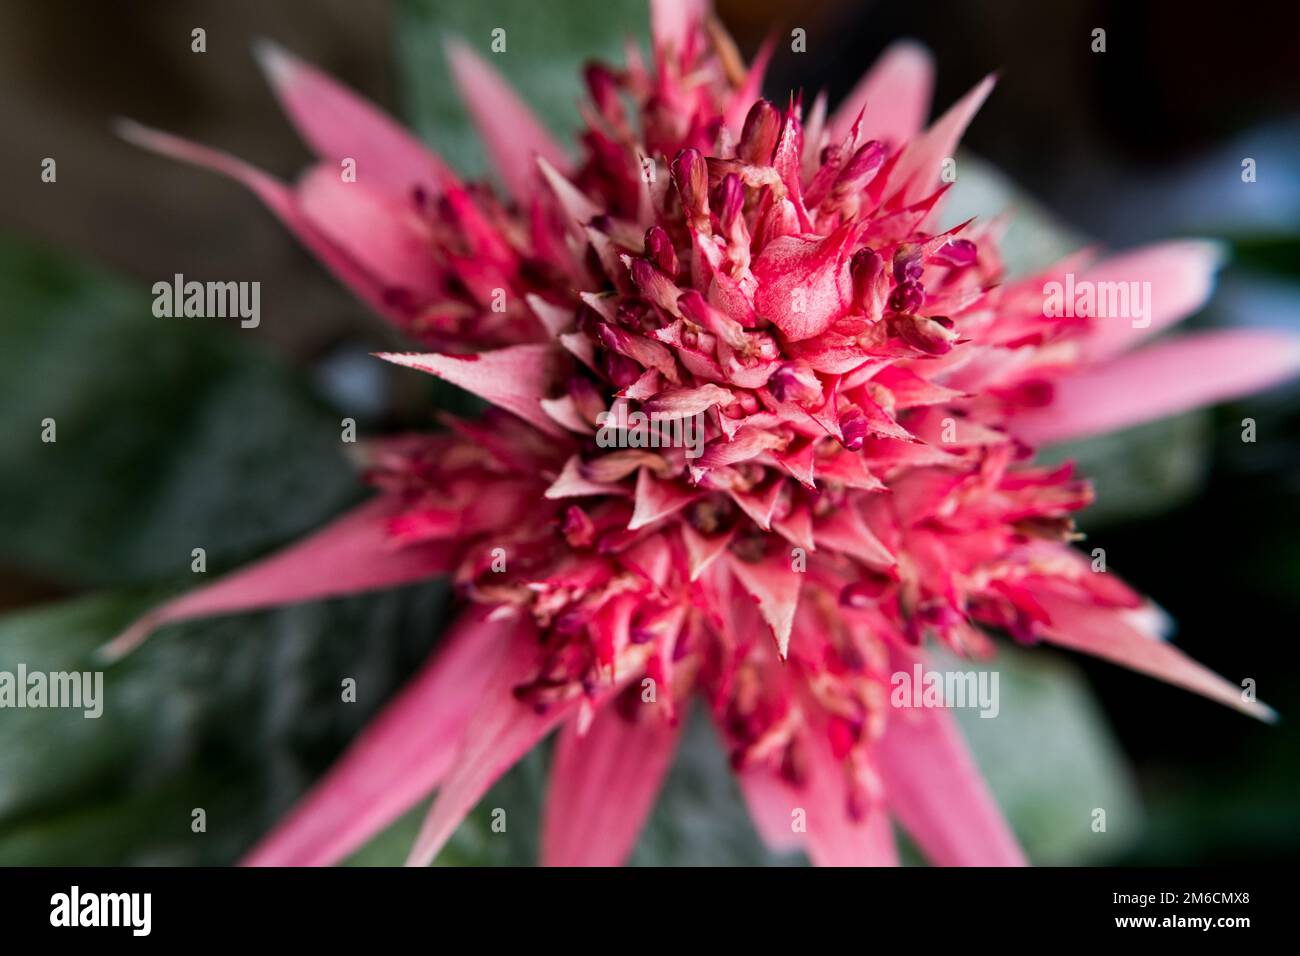 Beautiful nature background of a Bromeliad species flower. Stock Photo